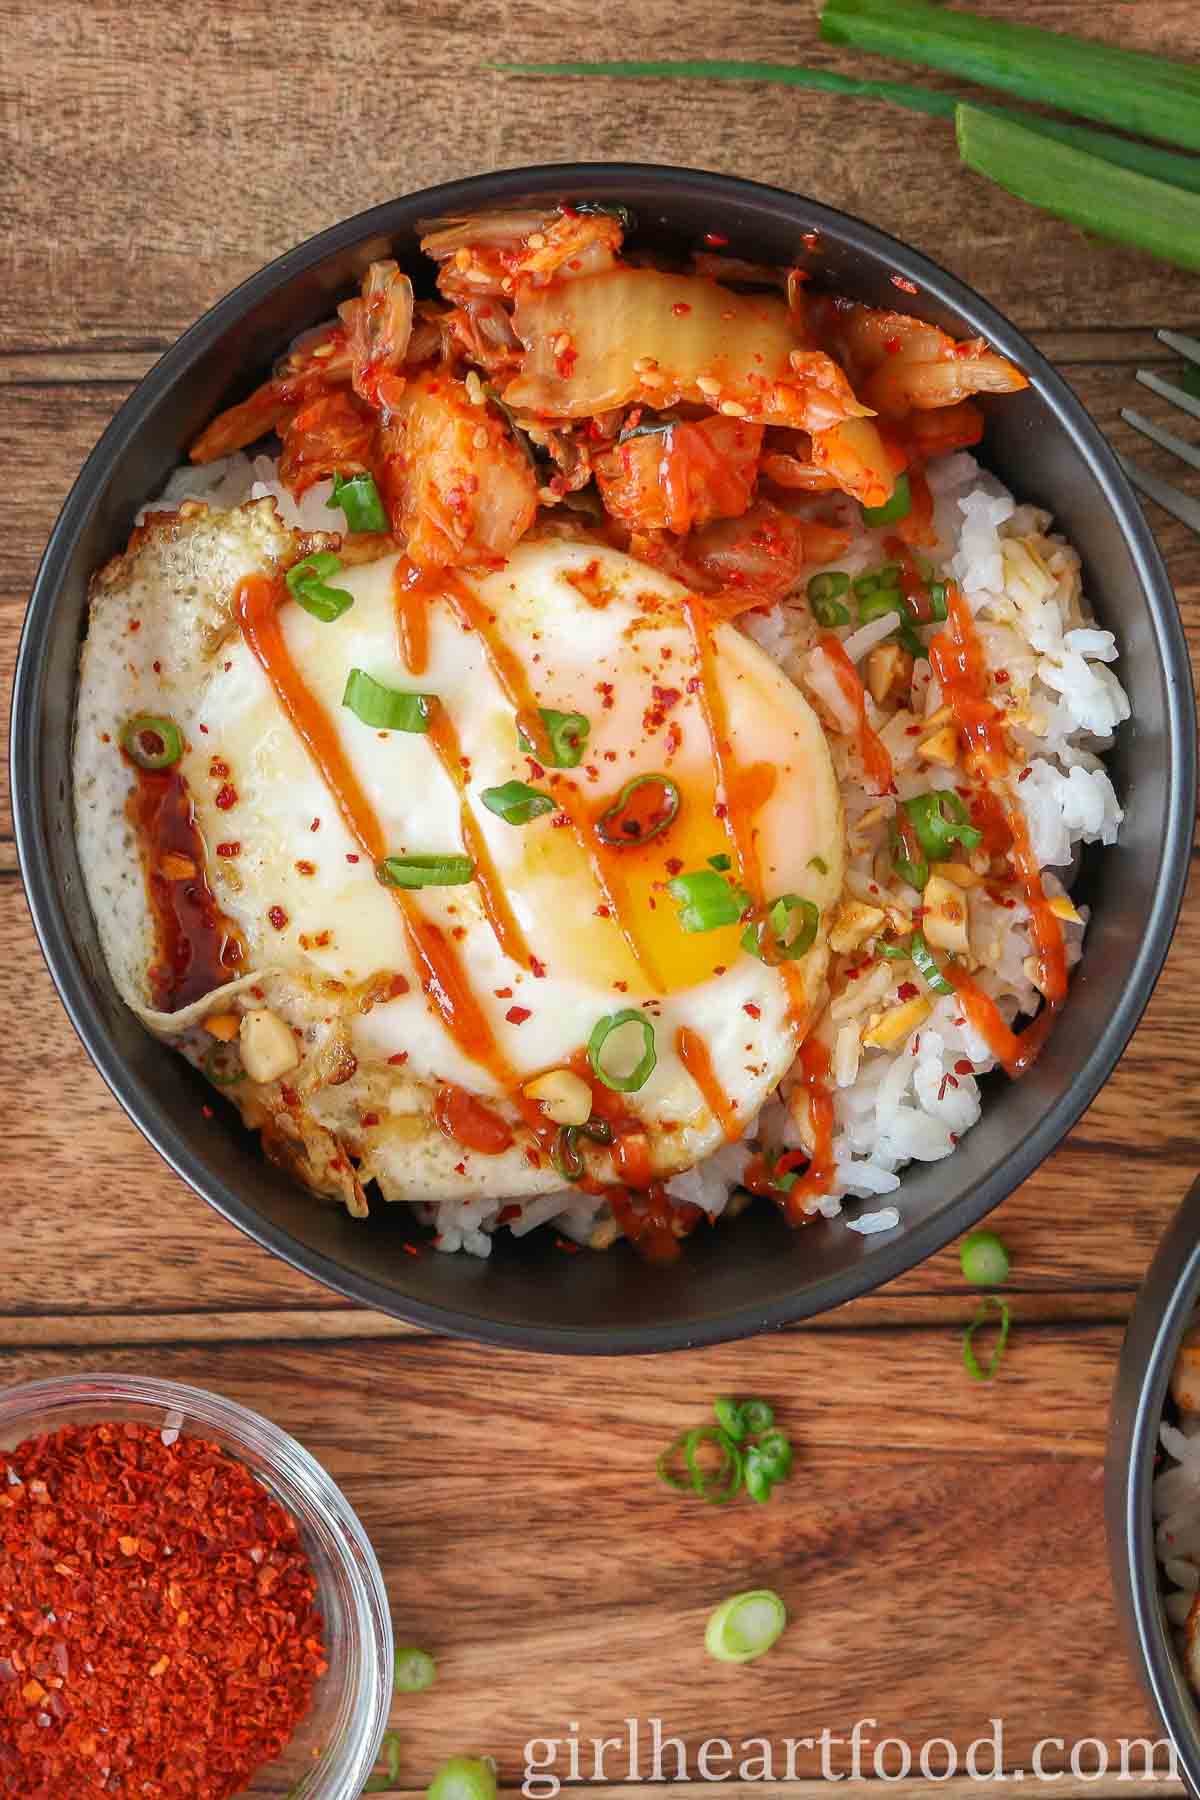 Fried egg and rice bowl drizzled with hot sauce.